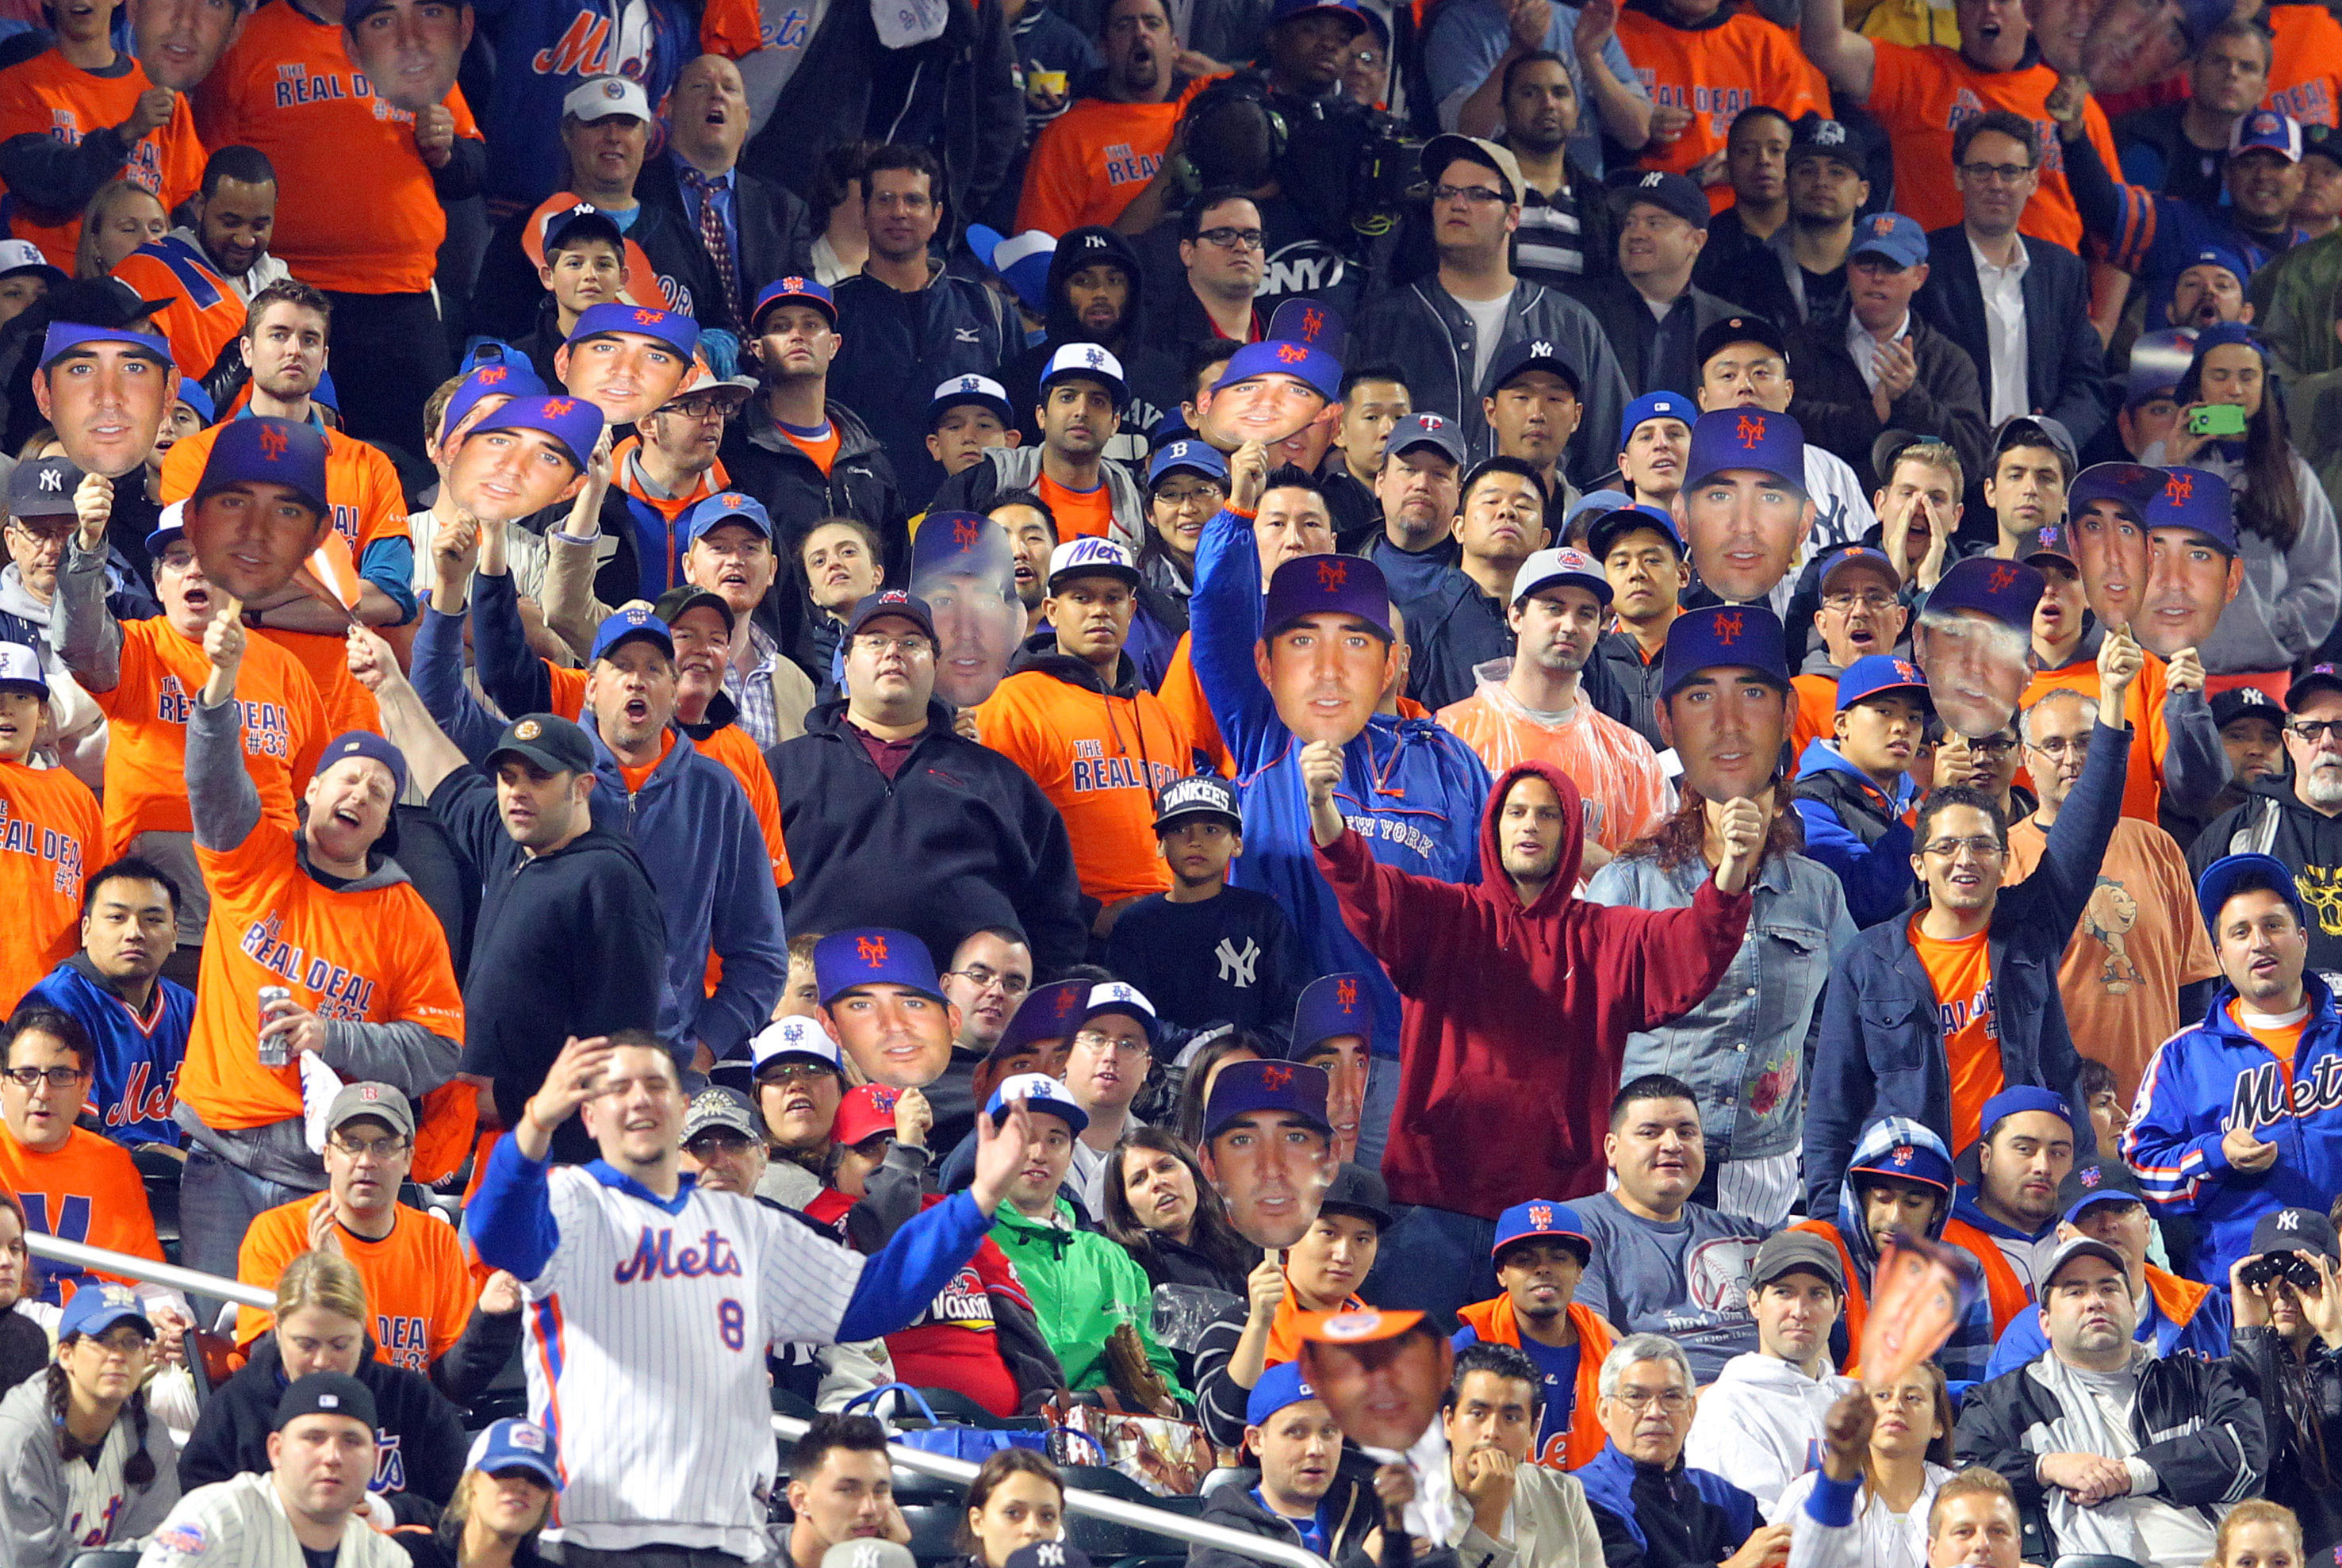 Yankees and Mets fans seem to be savoring Subway Series as it's